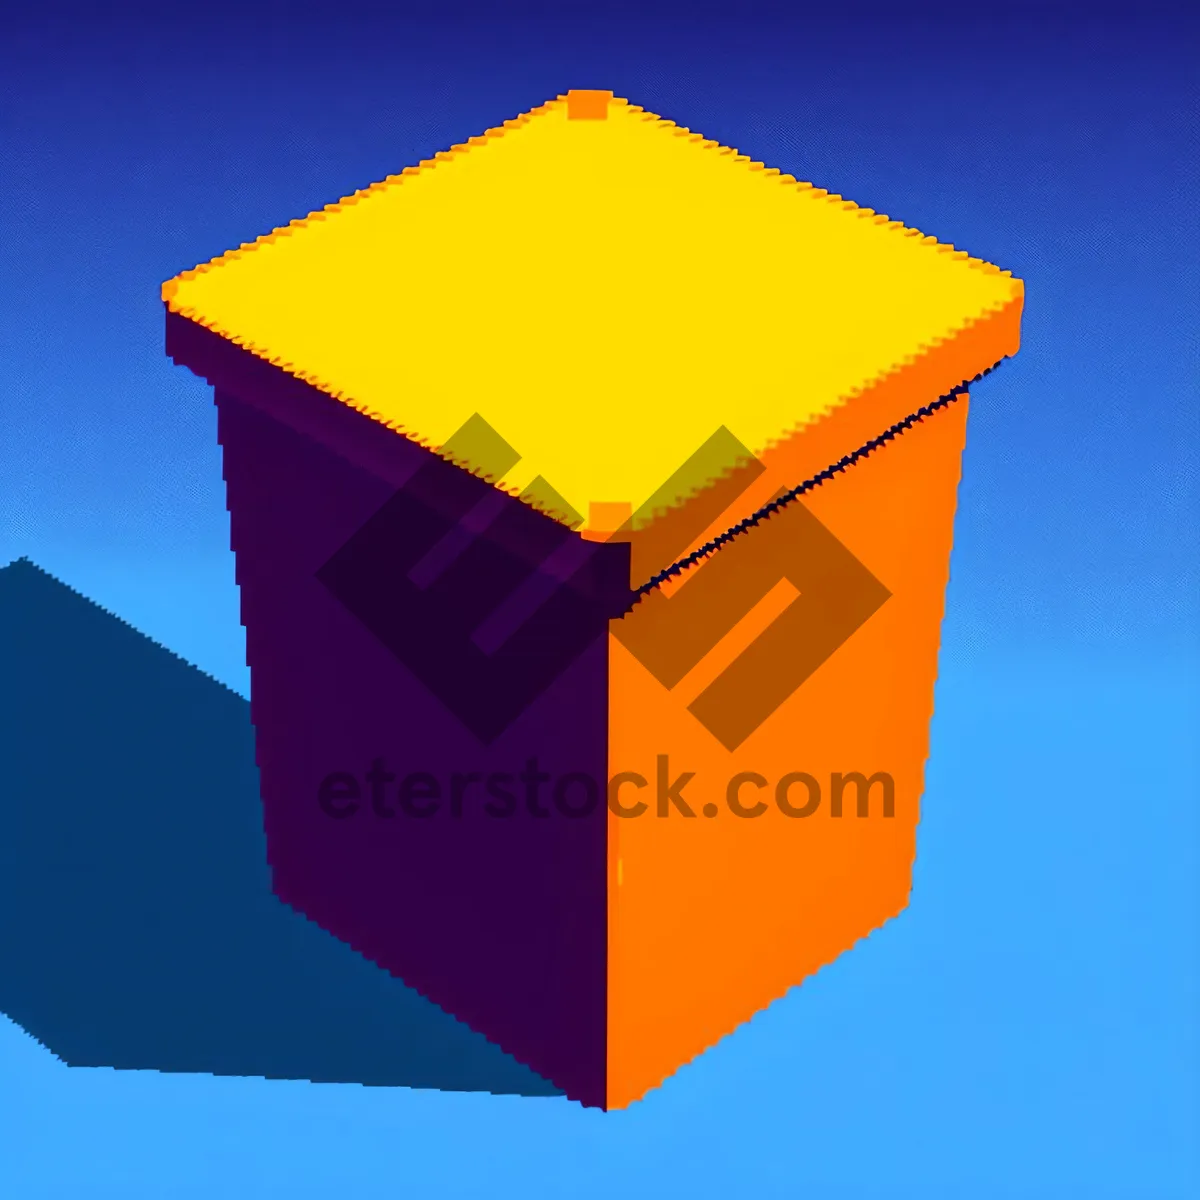 Picture of Open Carton Box Packaging - 3D Object Symbol